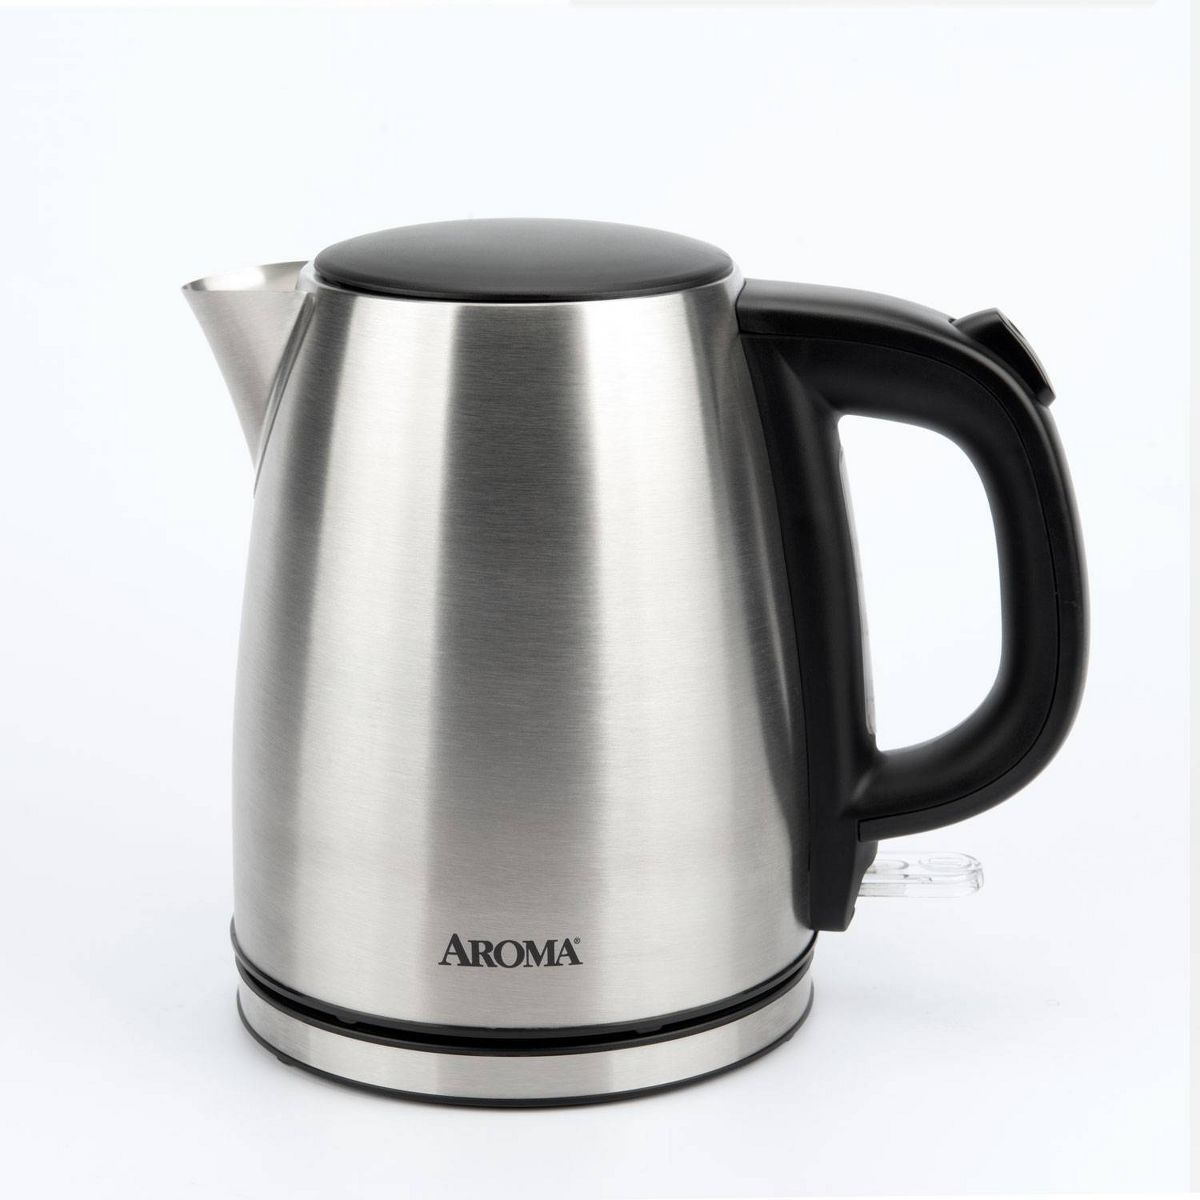 Aroma 1L Electric Water Kettle - Stainless Steel | Target